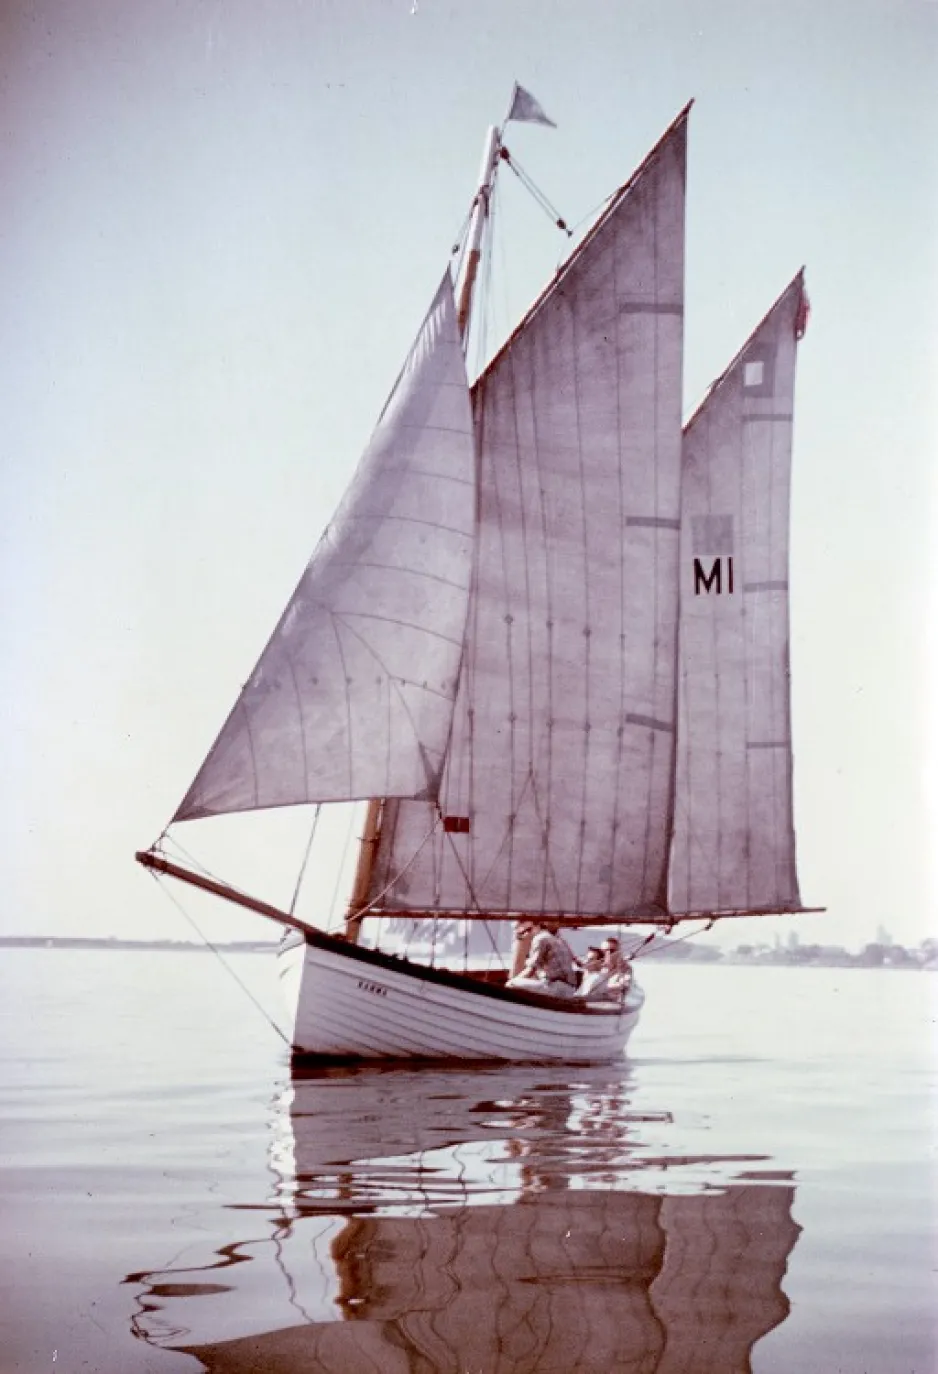 A white wooden boat with a large sails floats on the calm surface of a lake; three people are visible inside the boat.